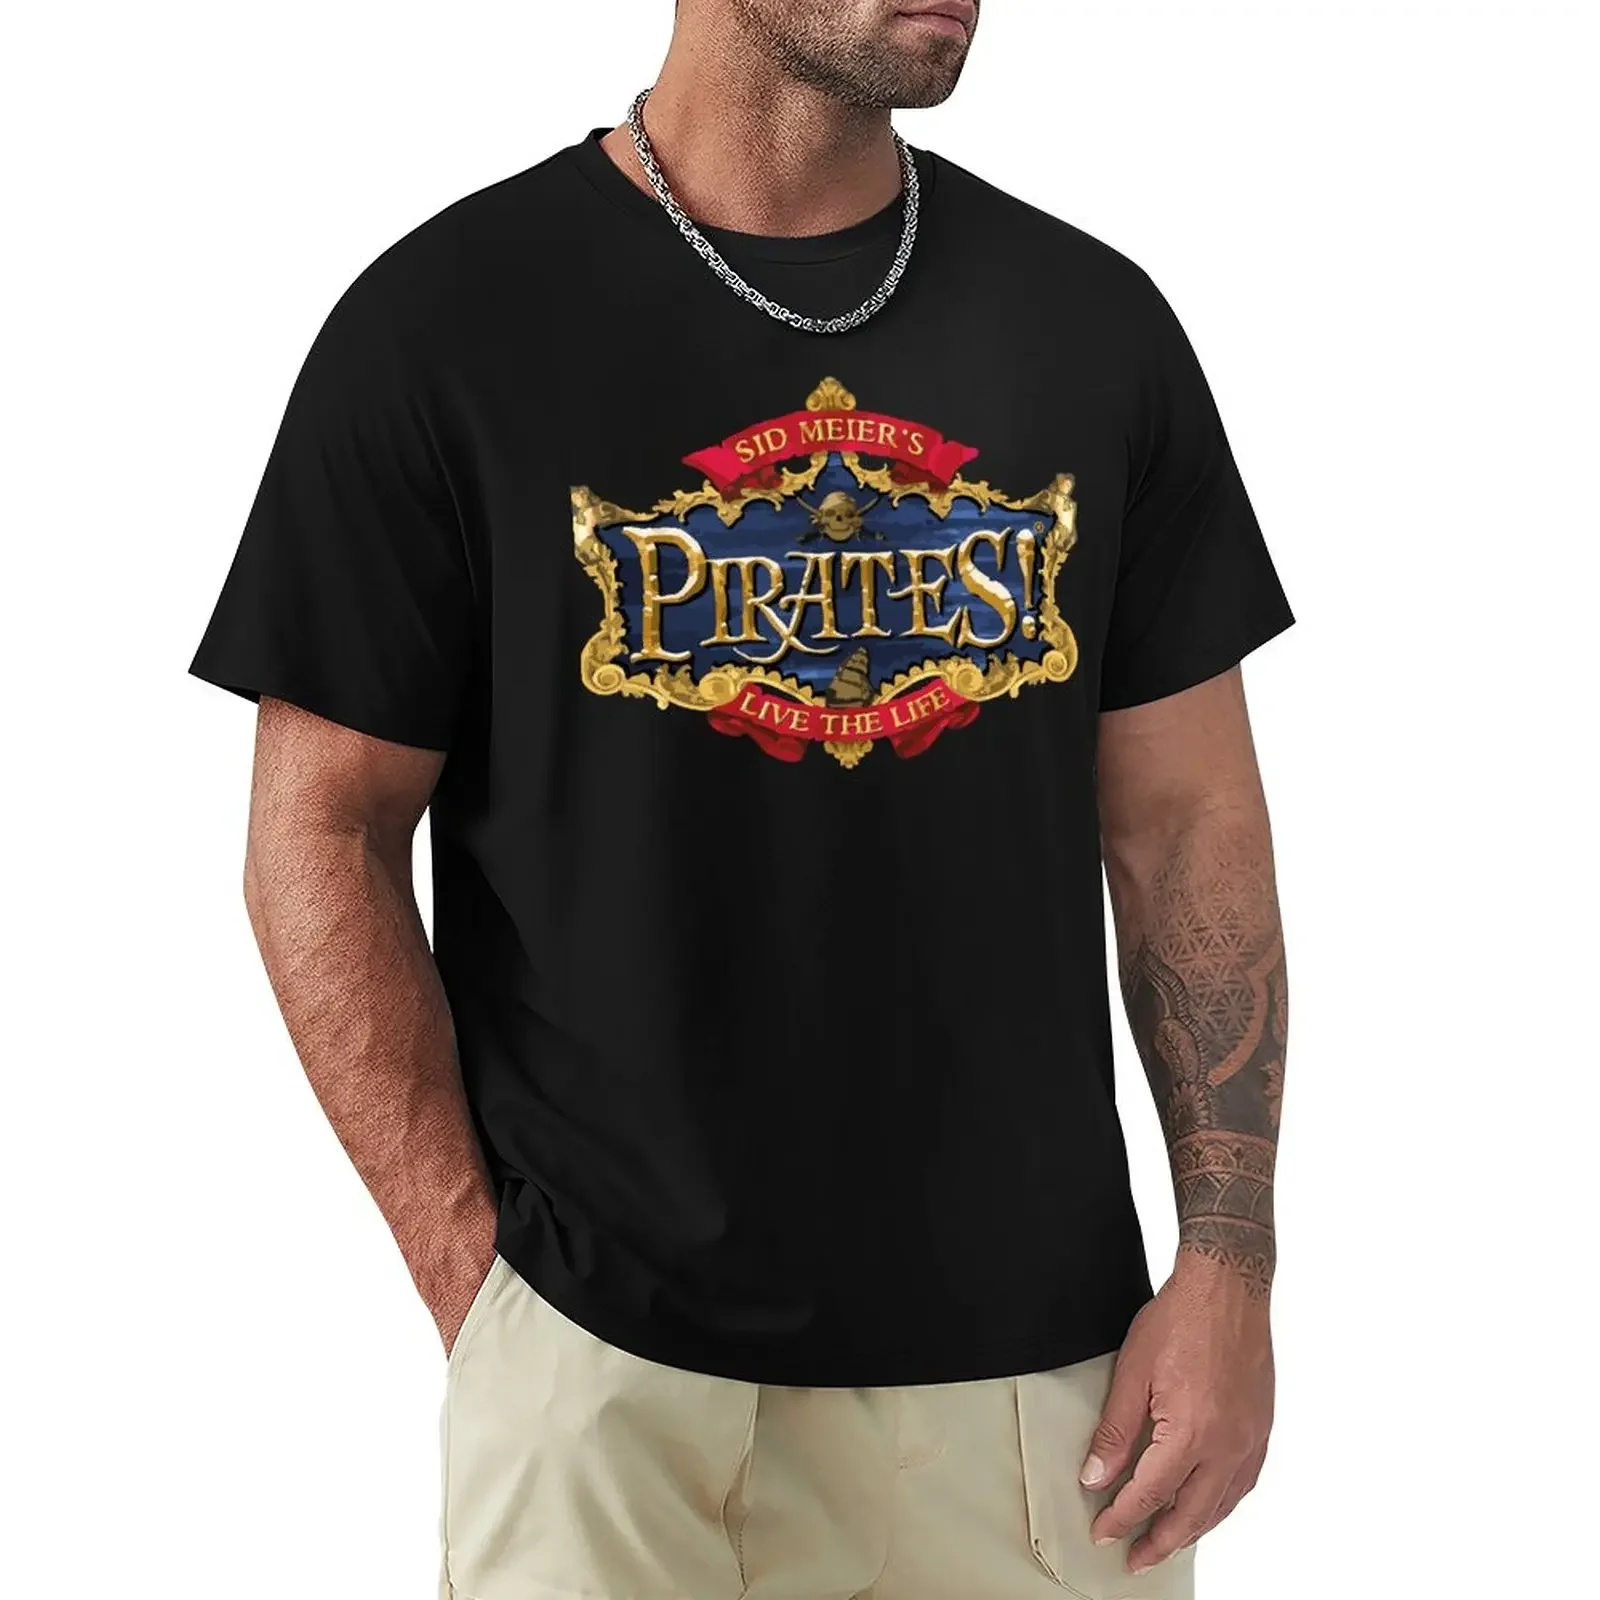 

Sid Meier's Pirates! T-Shirt summer tops funnys for a boy funny t shirts for men